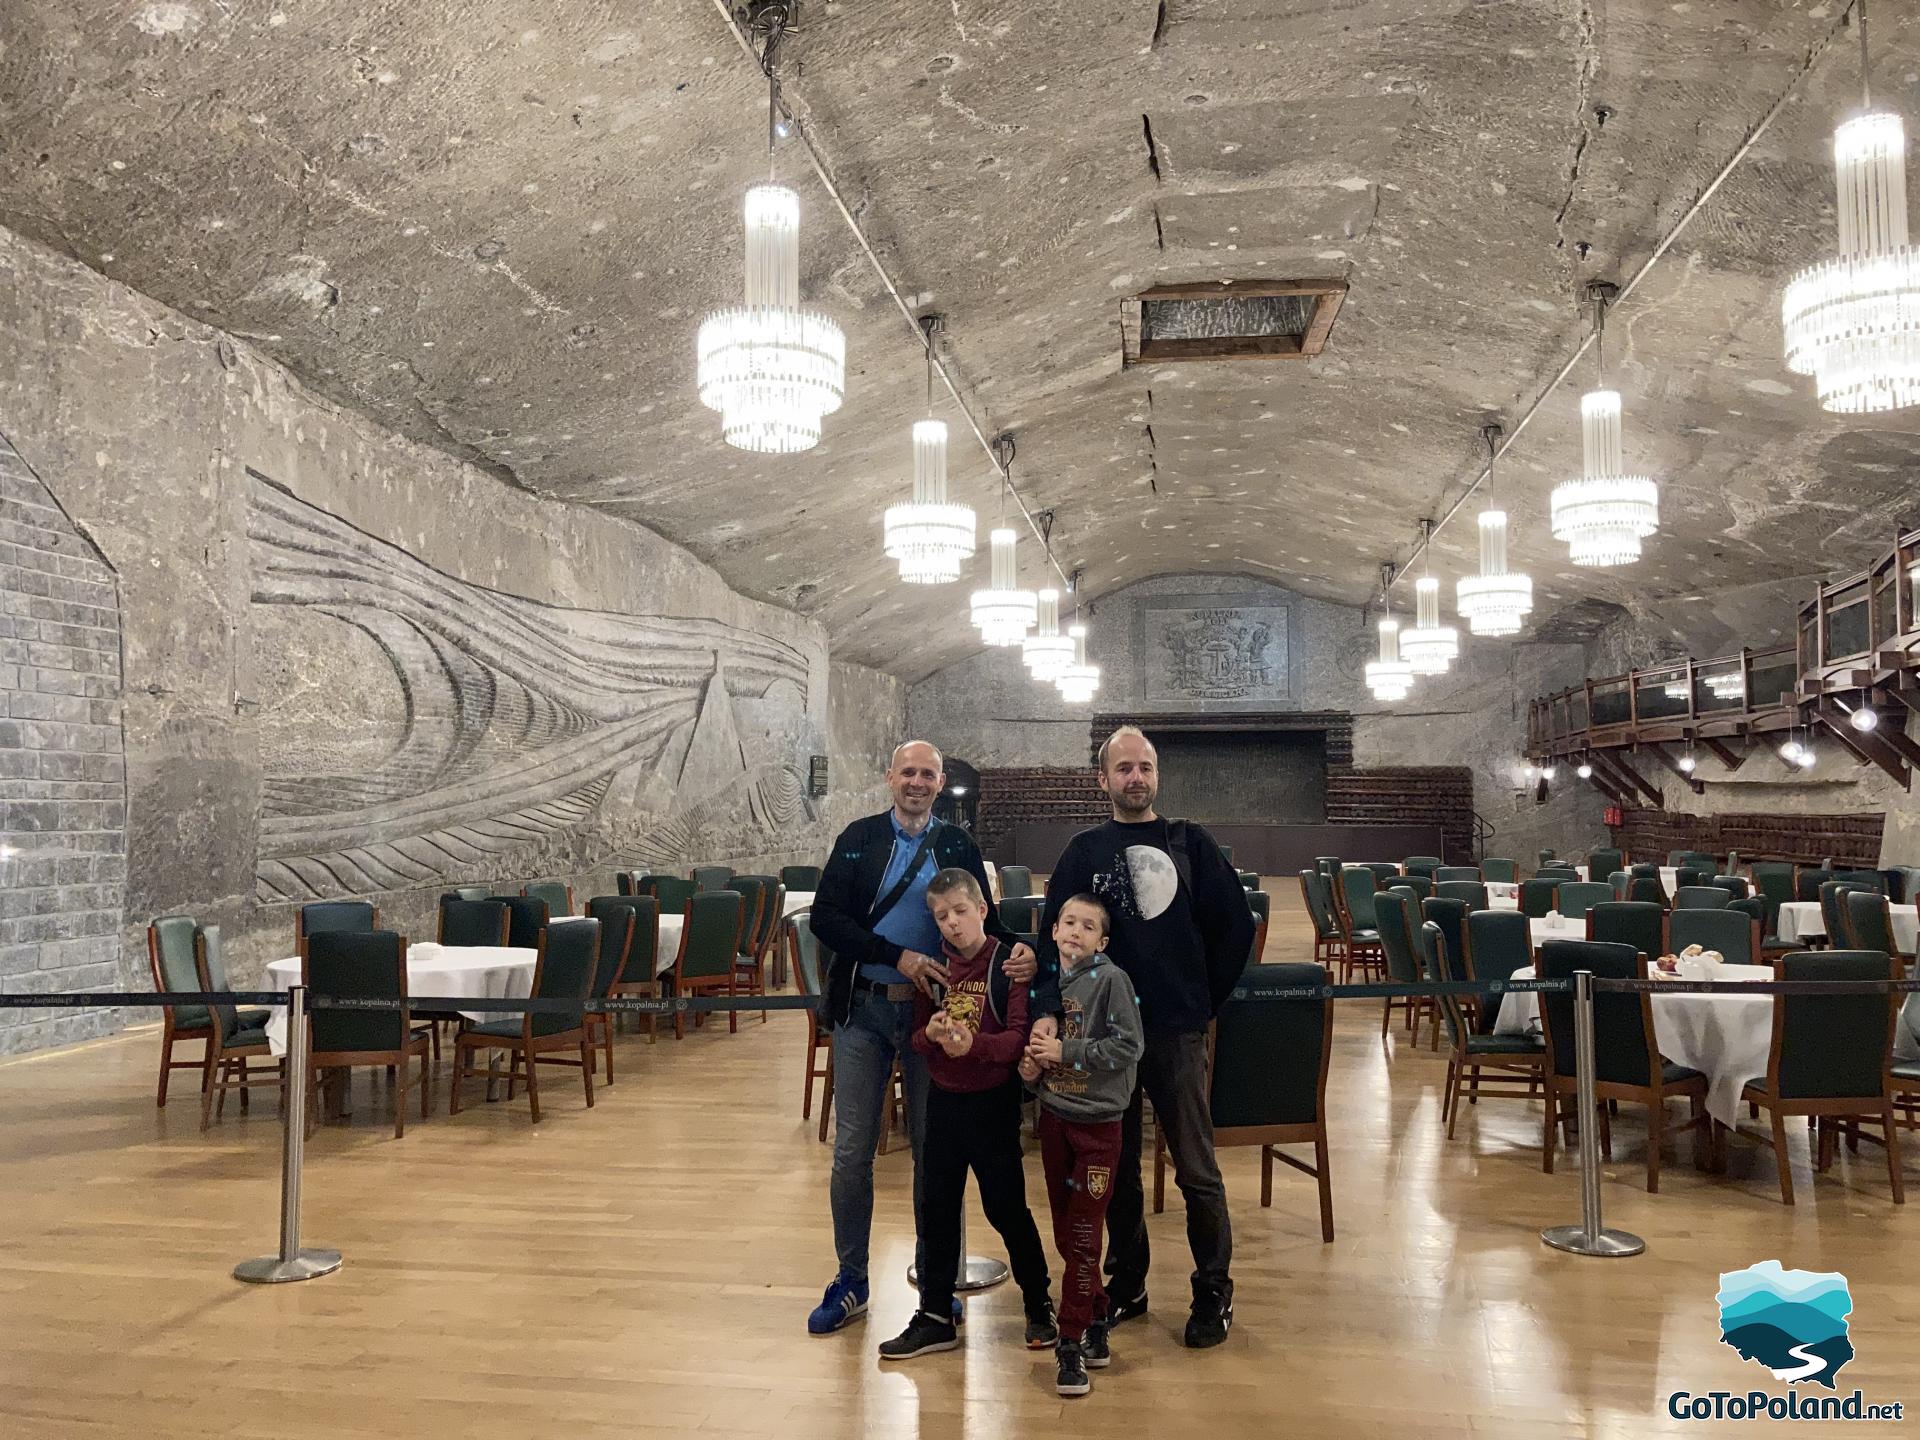 two men and two boys are in a salt mine restaurant, behind them are tables and chairs, the walls and ceiling are made of salt